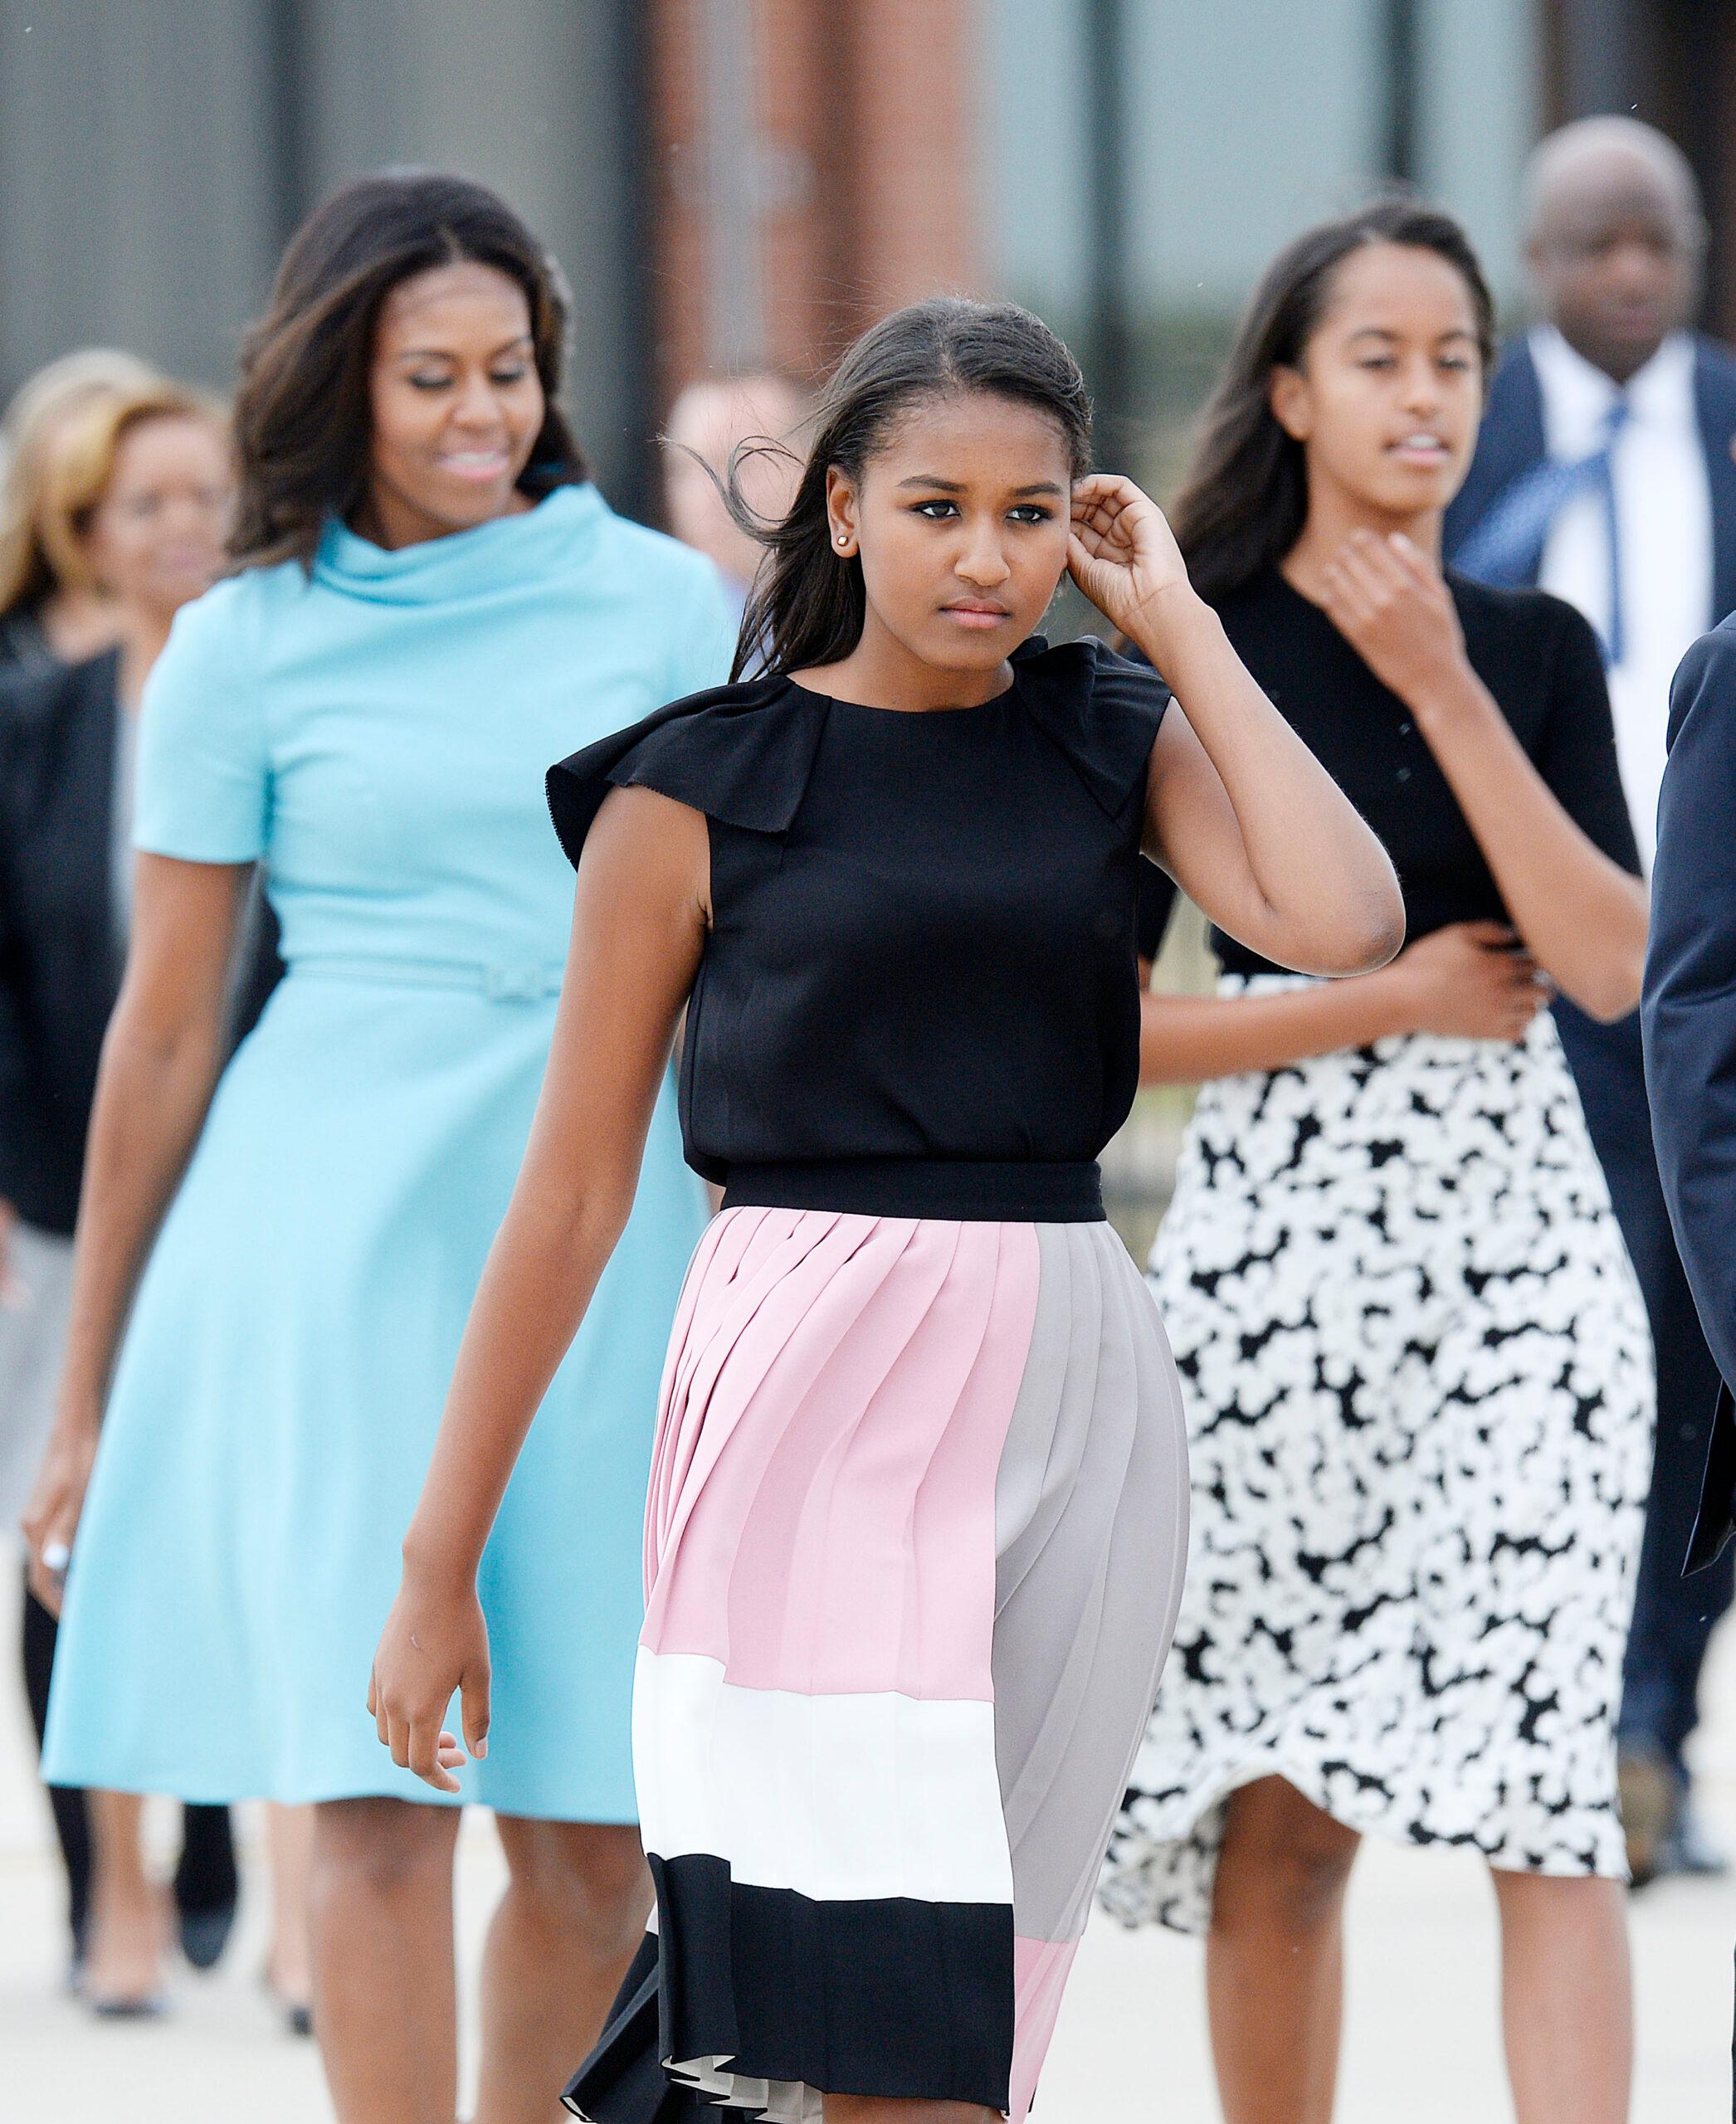 Former First Lady Michelle Obama with daughters Sasha and Malia arrive to welcome His Holiness Pope Francis